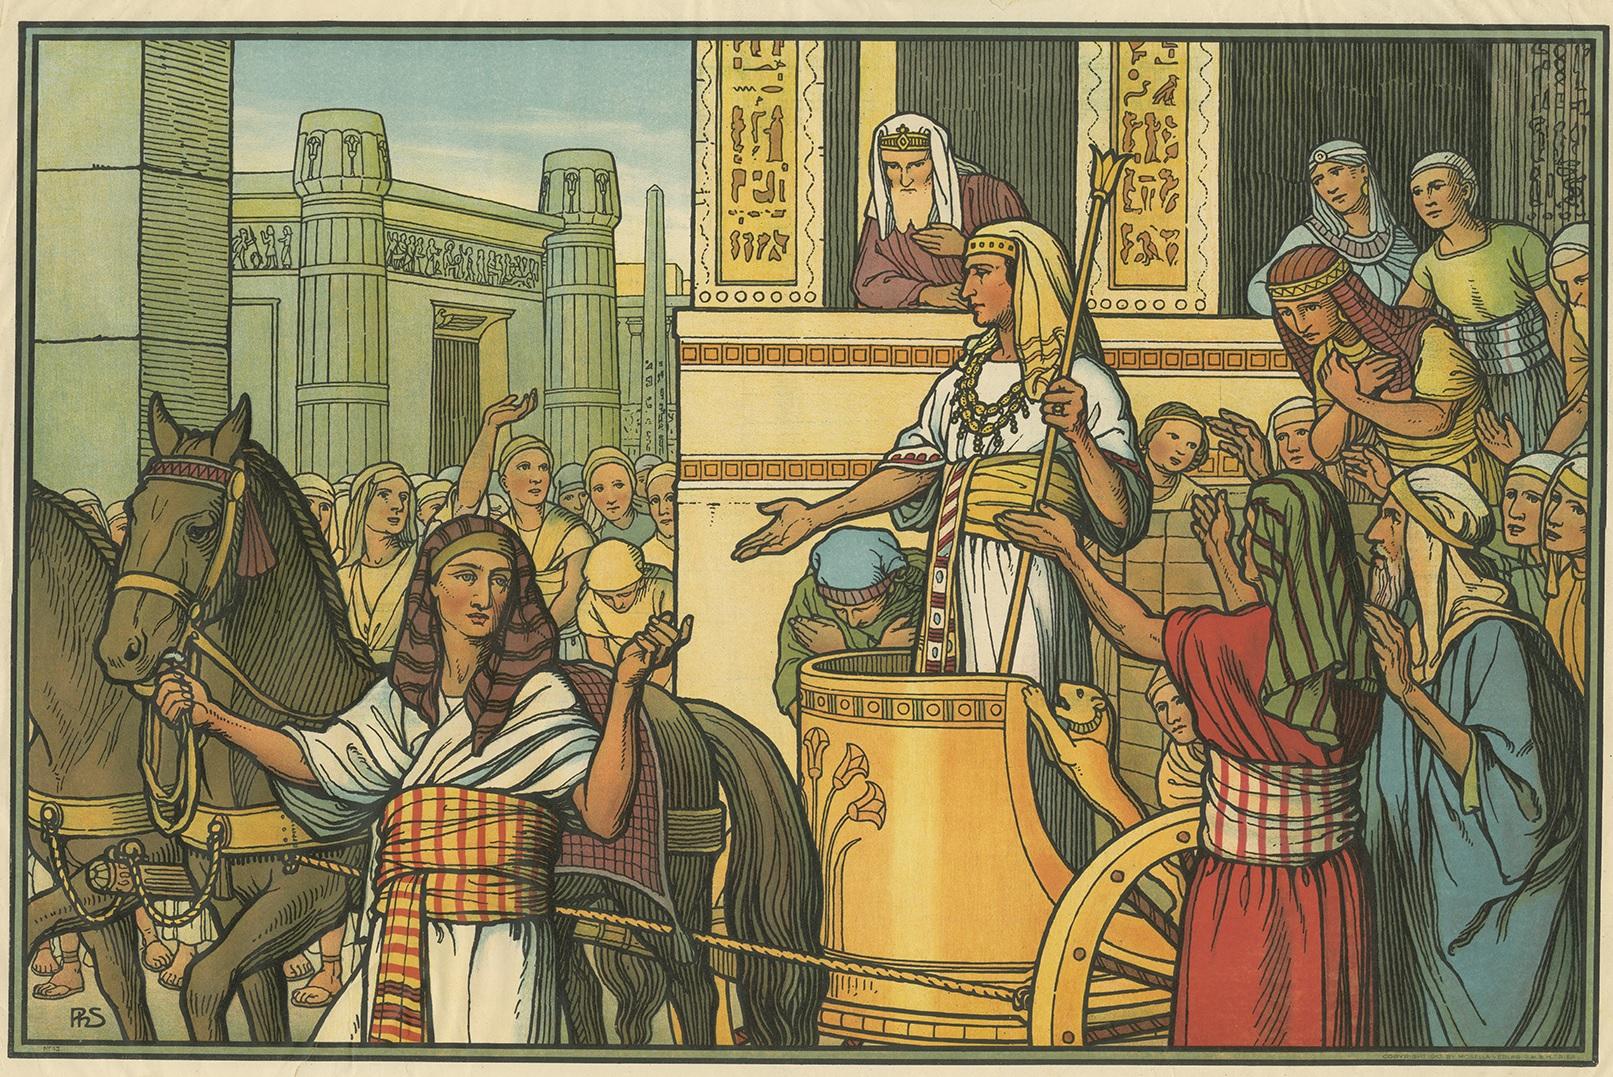 Large antique print of the Pharaoh and Israelites. Published by Mosella-Verlag, 1913. This print originates from a series titled 'Kathol. Schulbibelwerk von Dr. Ecker'.